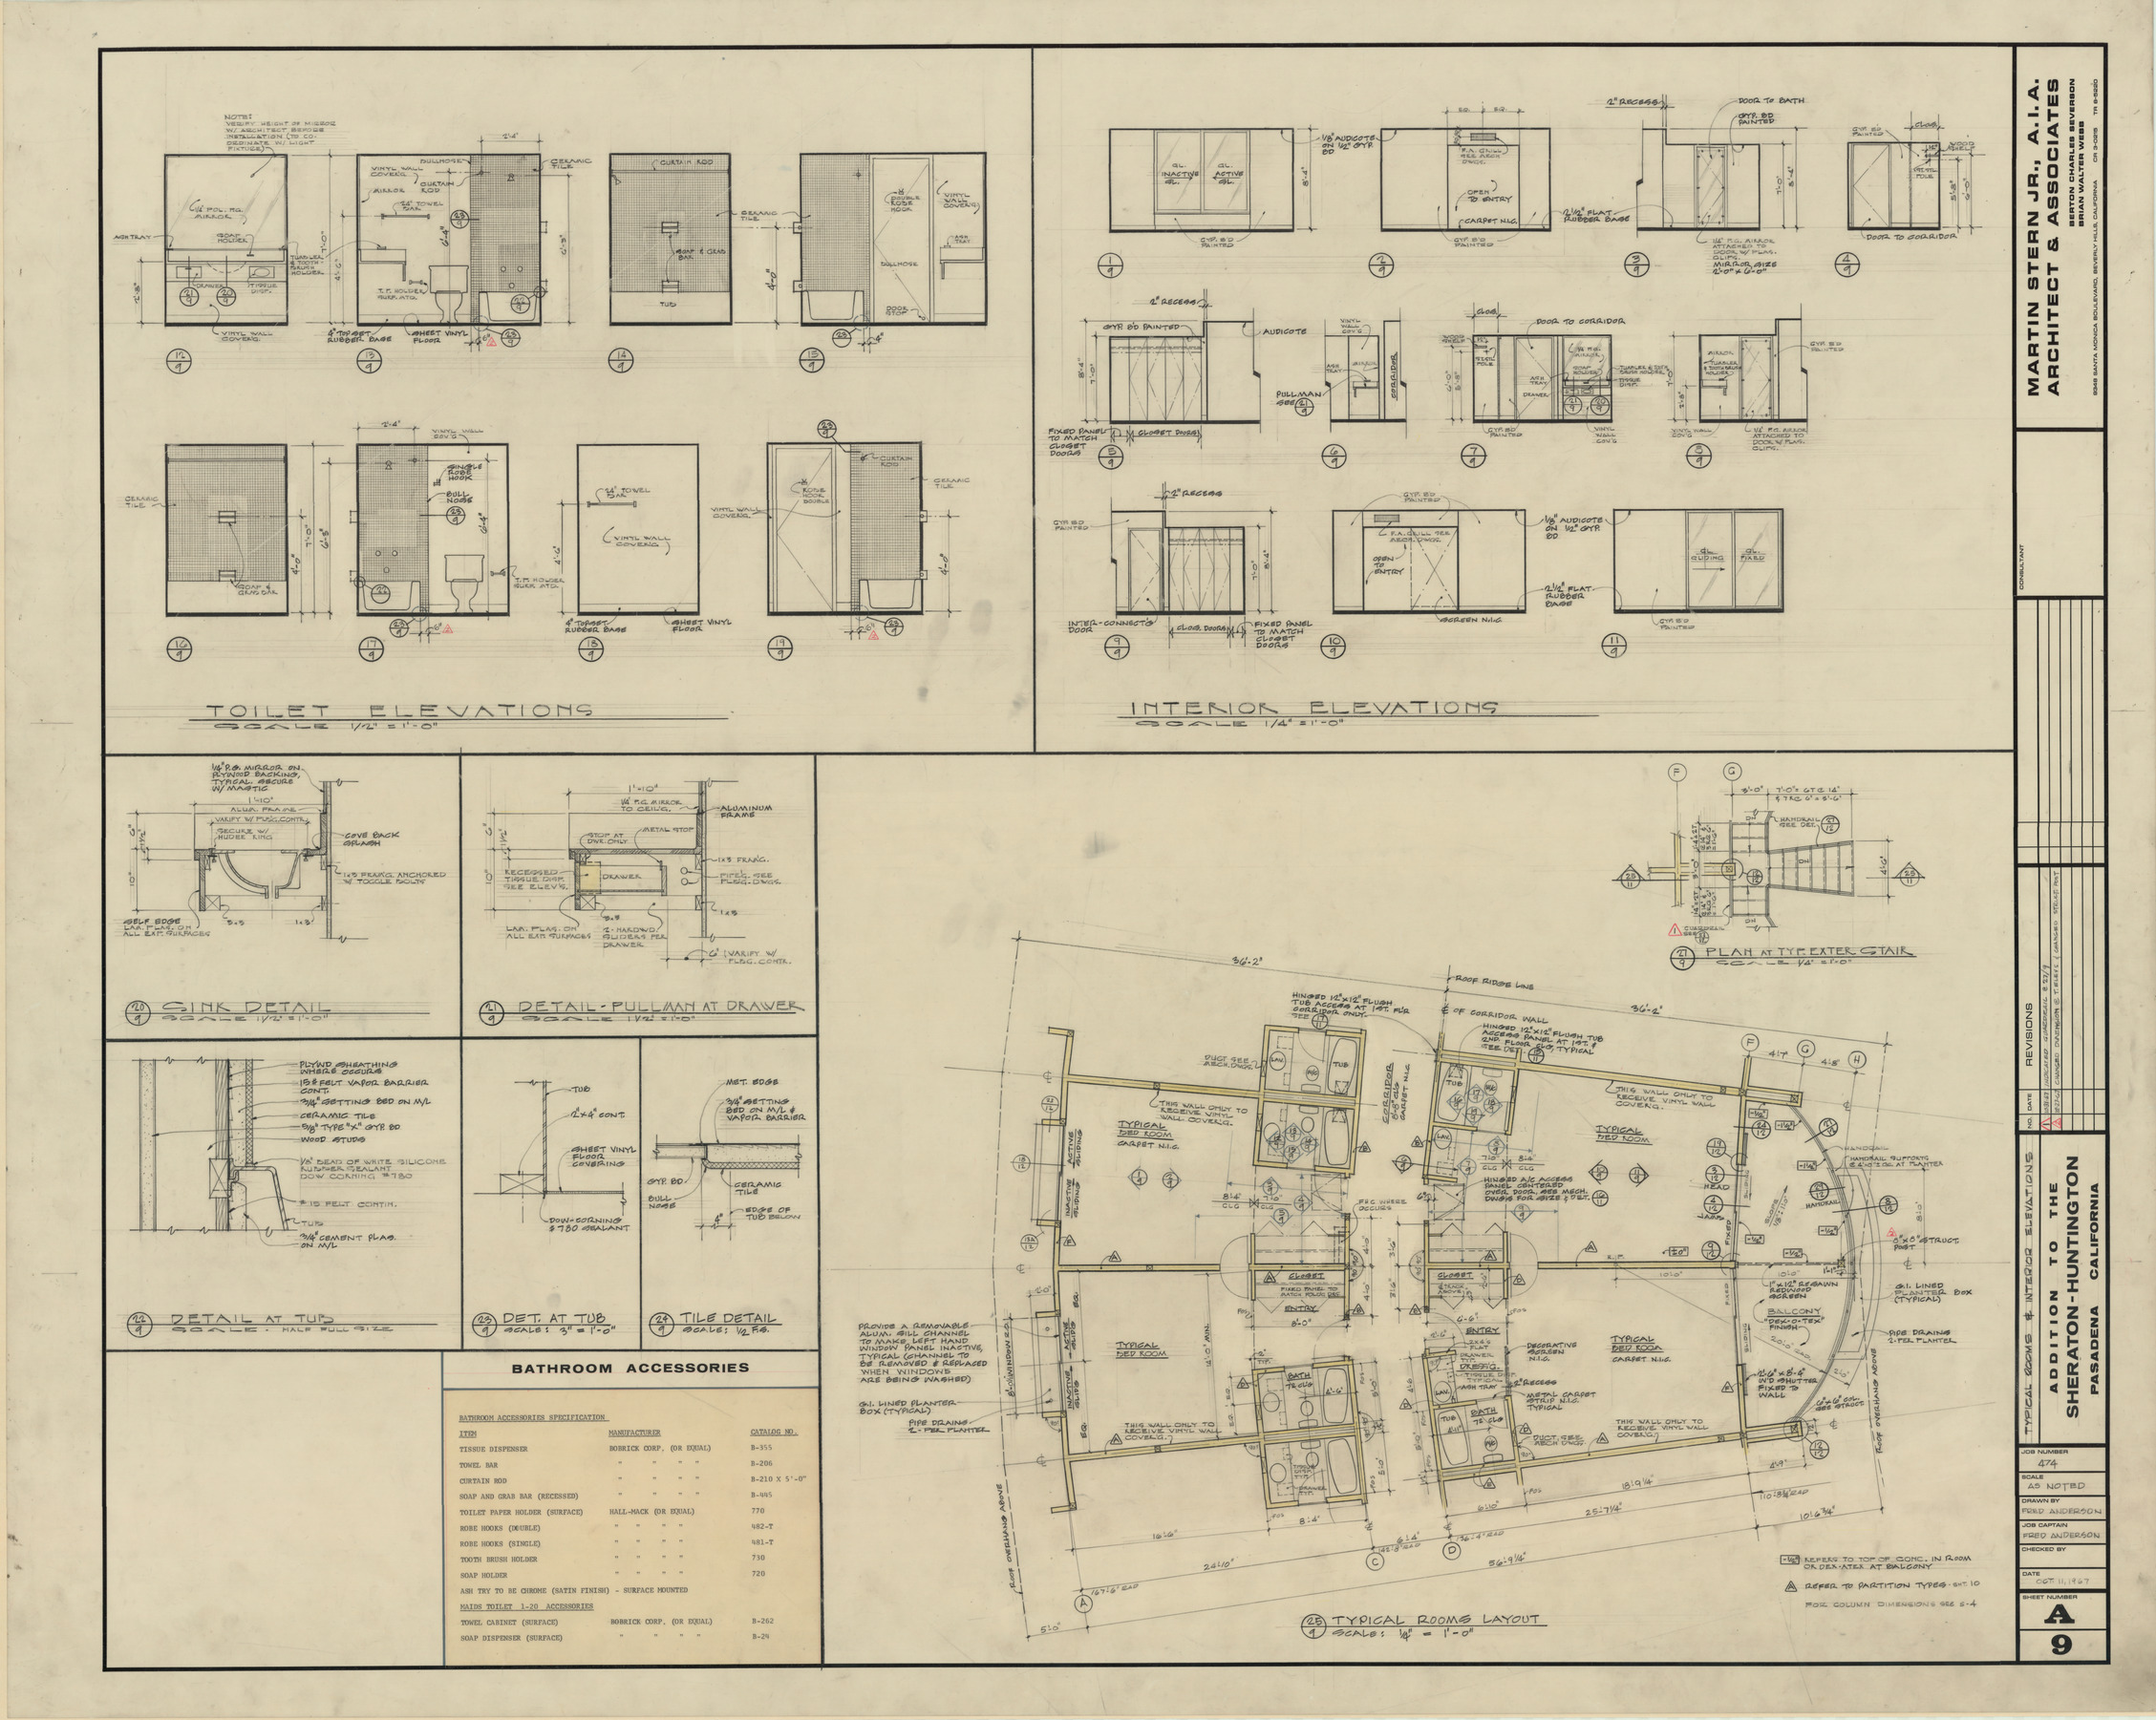 Huntington addition, architectural, electrical, mechanical, and plumbing: architectural drawings, image 010